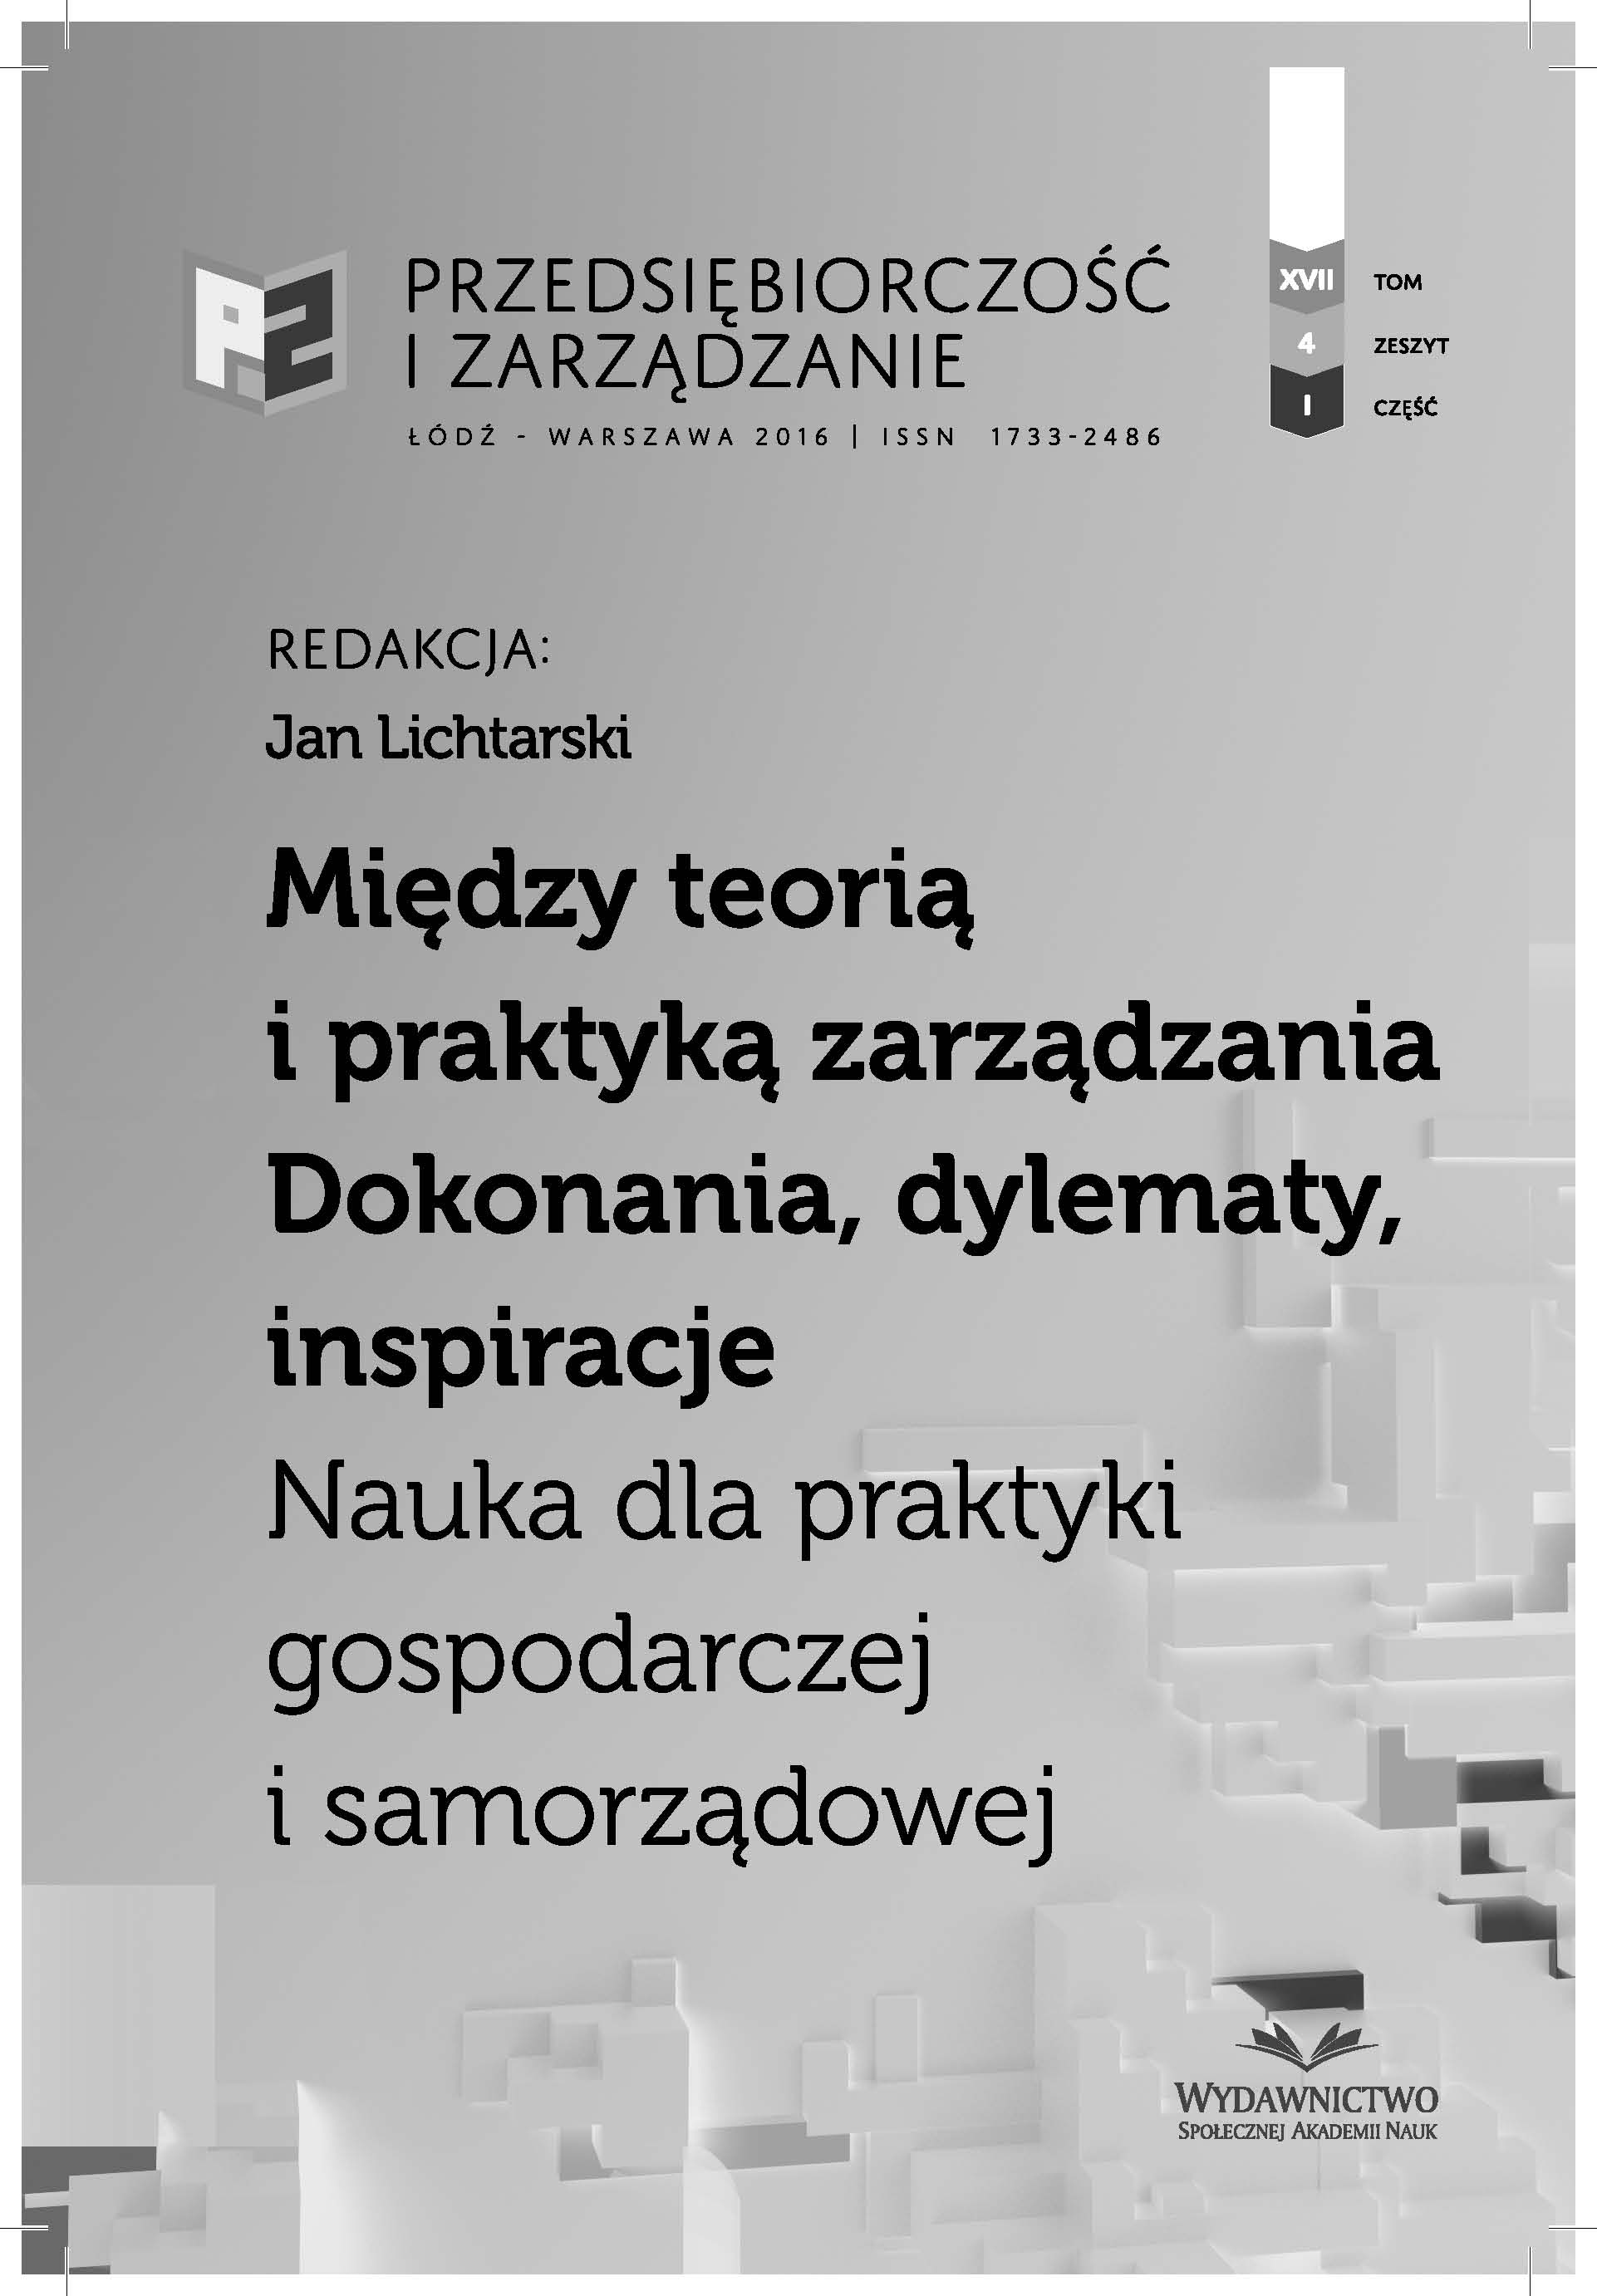 Changes in the Institutions of Higher Education in Poland, Stakeholders Have a Voice Cover Image